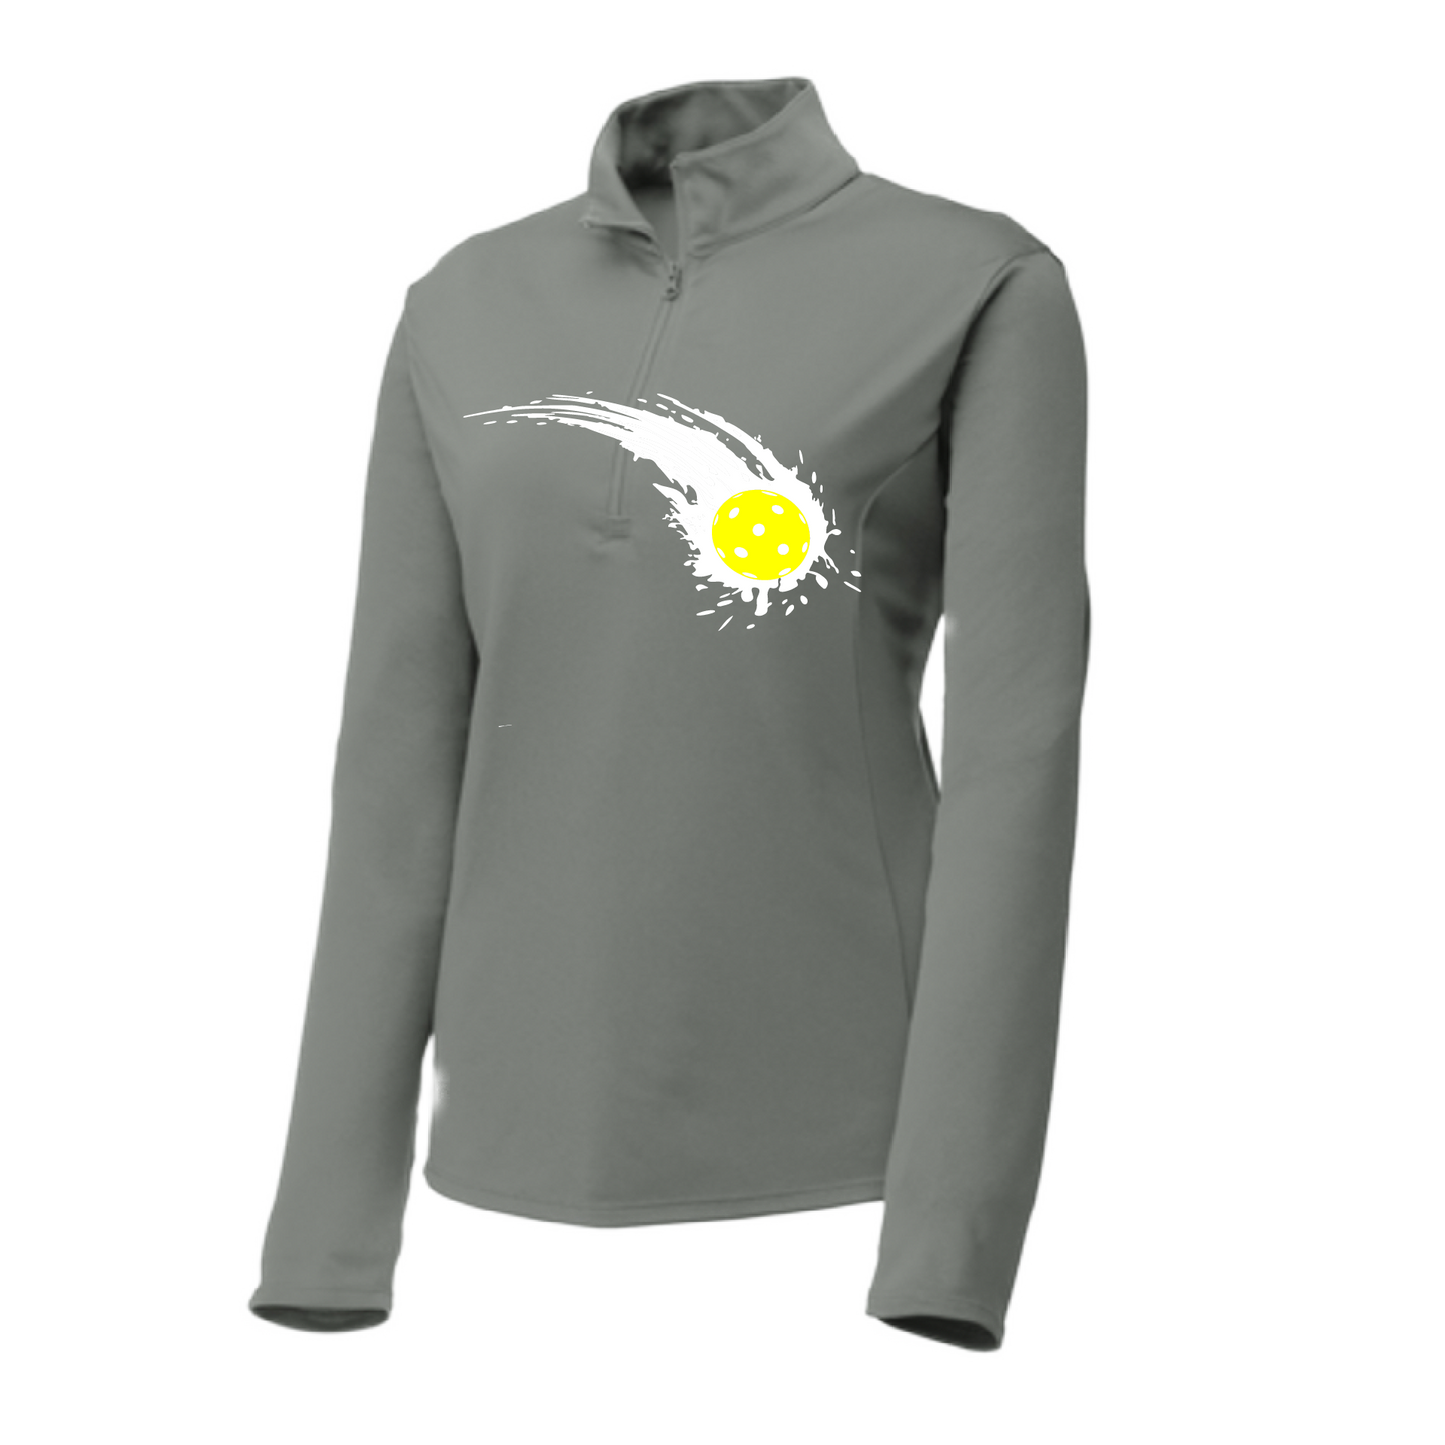 Pickleball Design: Impact Customizable Location  Women's 1/4-Zip Pullover: Princess seams and drop tail hem.  Turn up the volume in this Women's shirt with its perfect mix of softness and attitude. Material is ultra-comfortable with moisture wicking properties and tri-blend softness. PosiCharge technology locks in color. Highly breathable and lightweight. Versatile enough for wearing year-round.